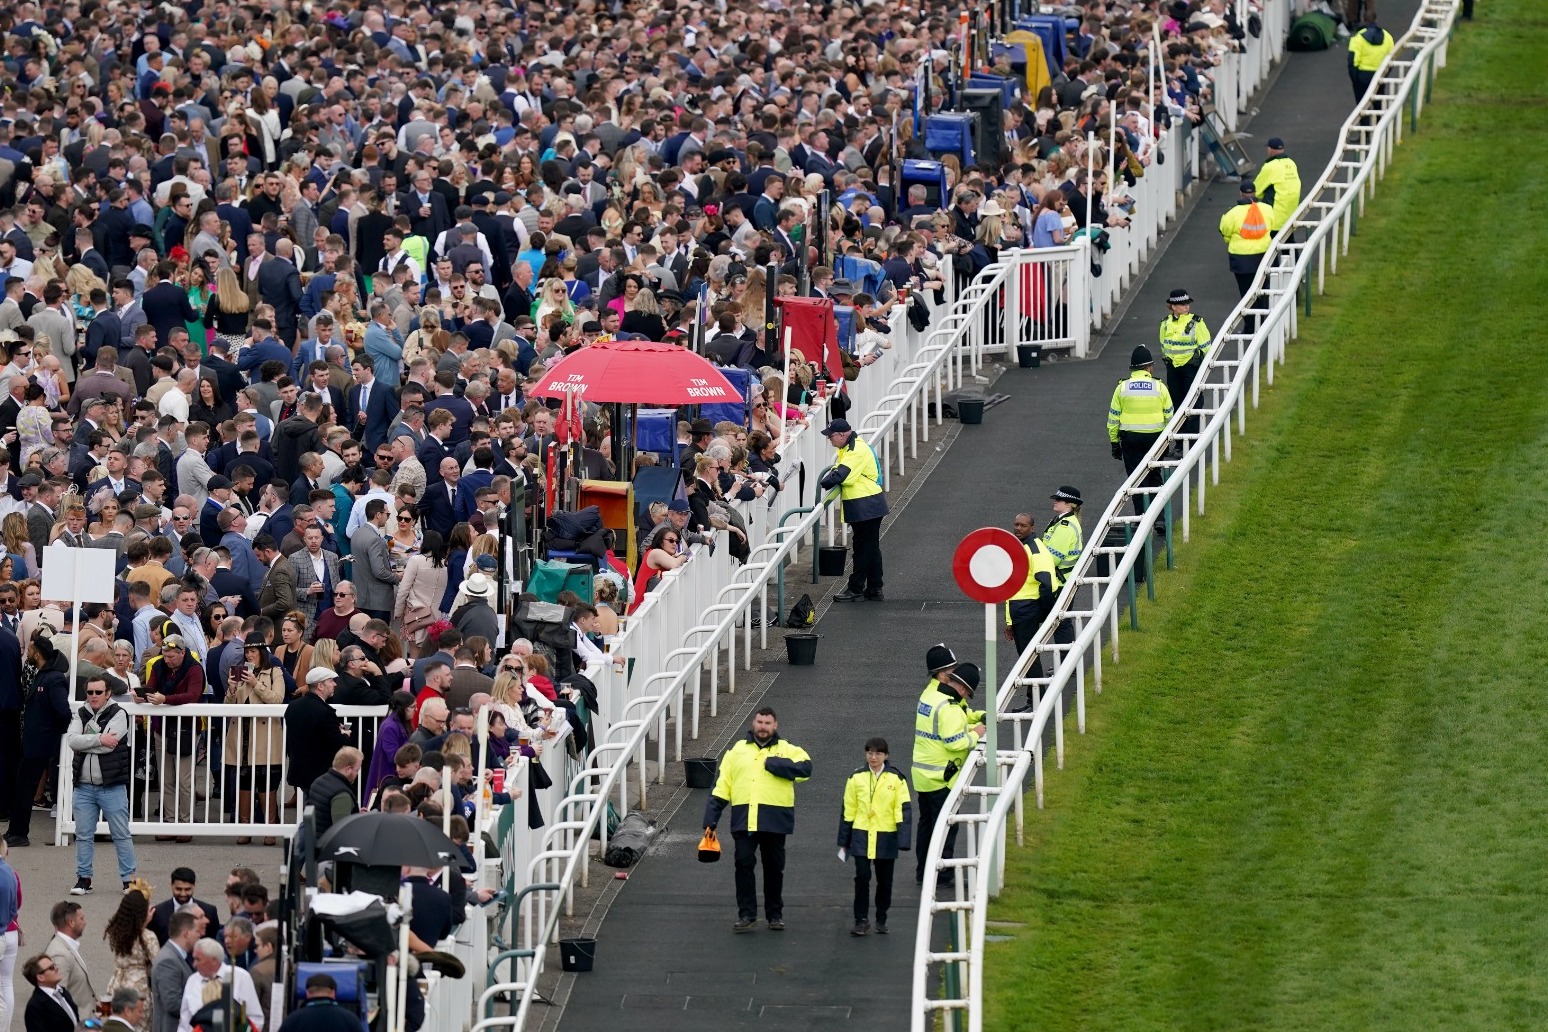 Three arrested ‘over potential co-ordinated disruption’ at Grand National 